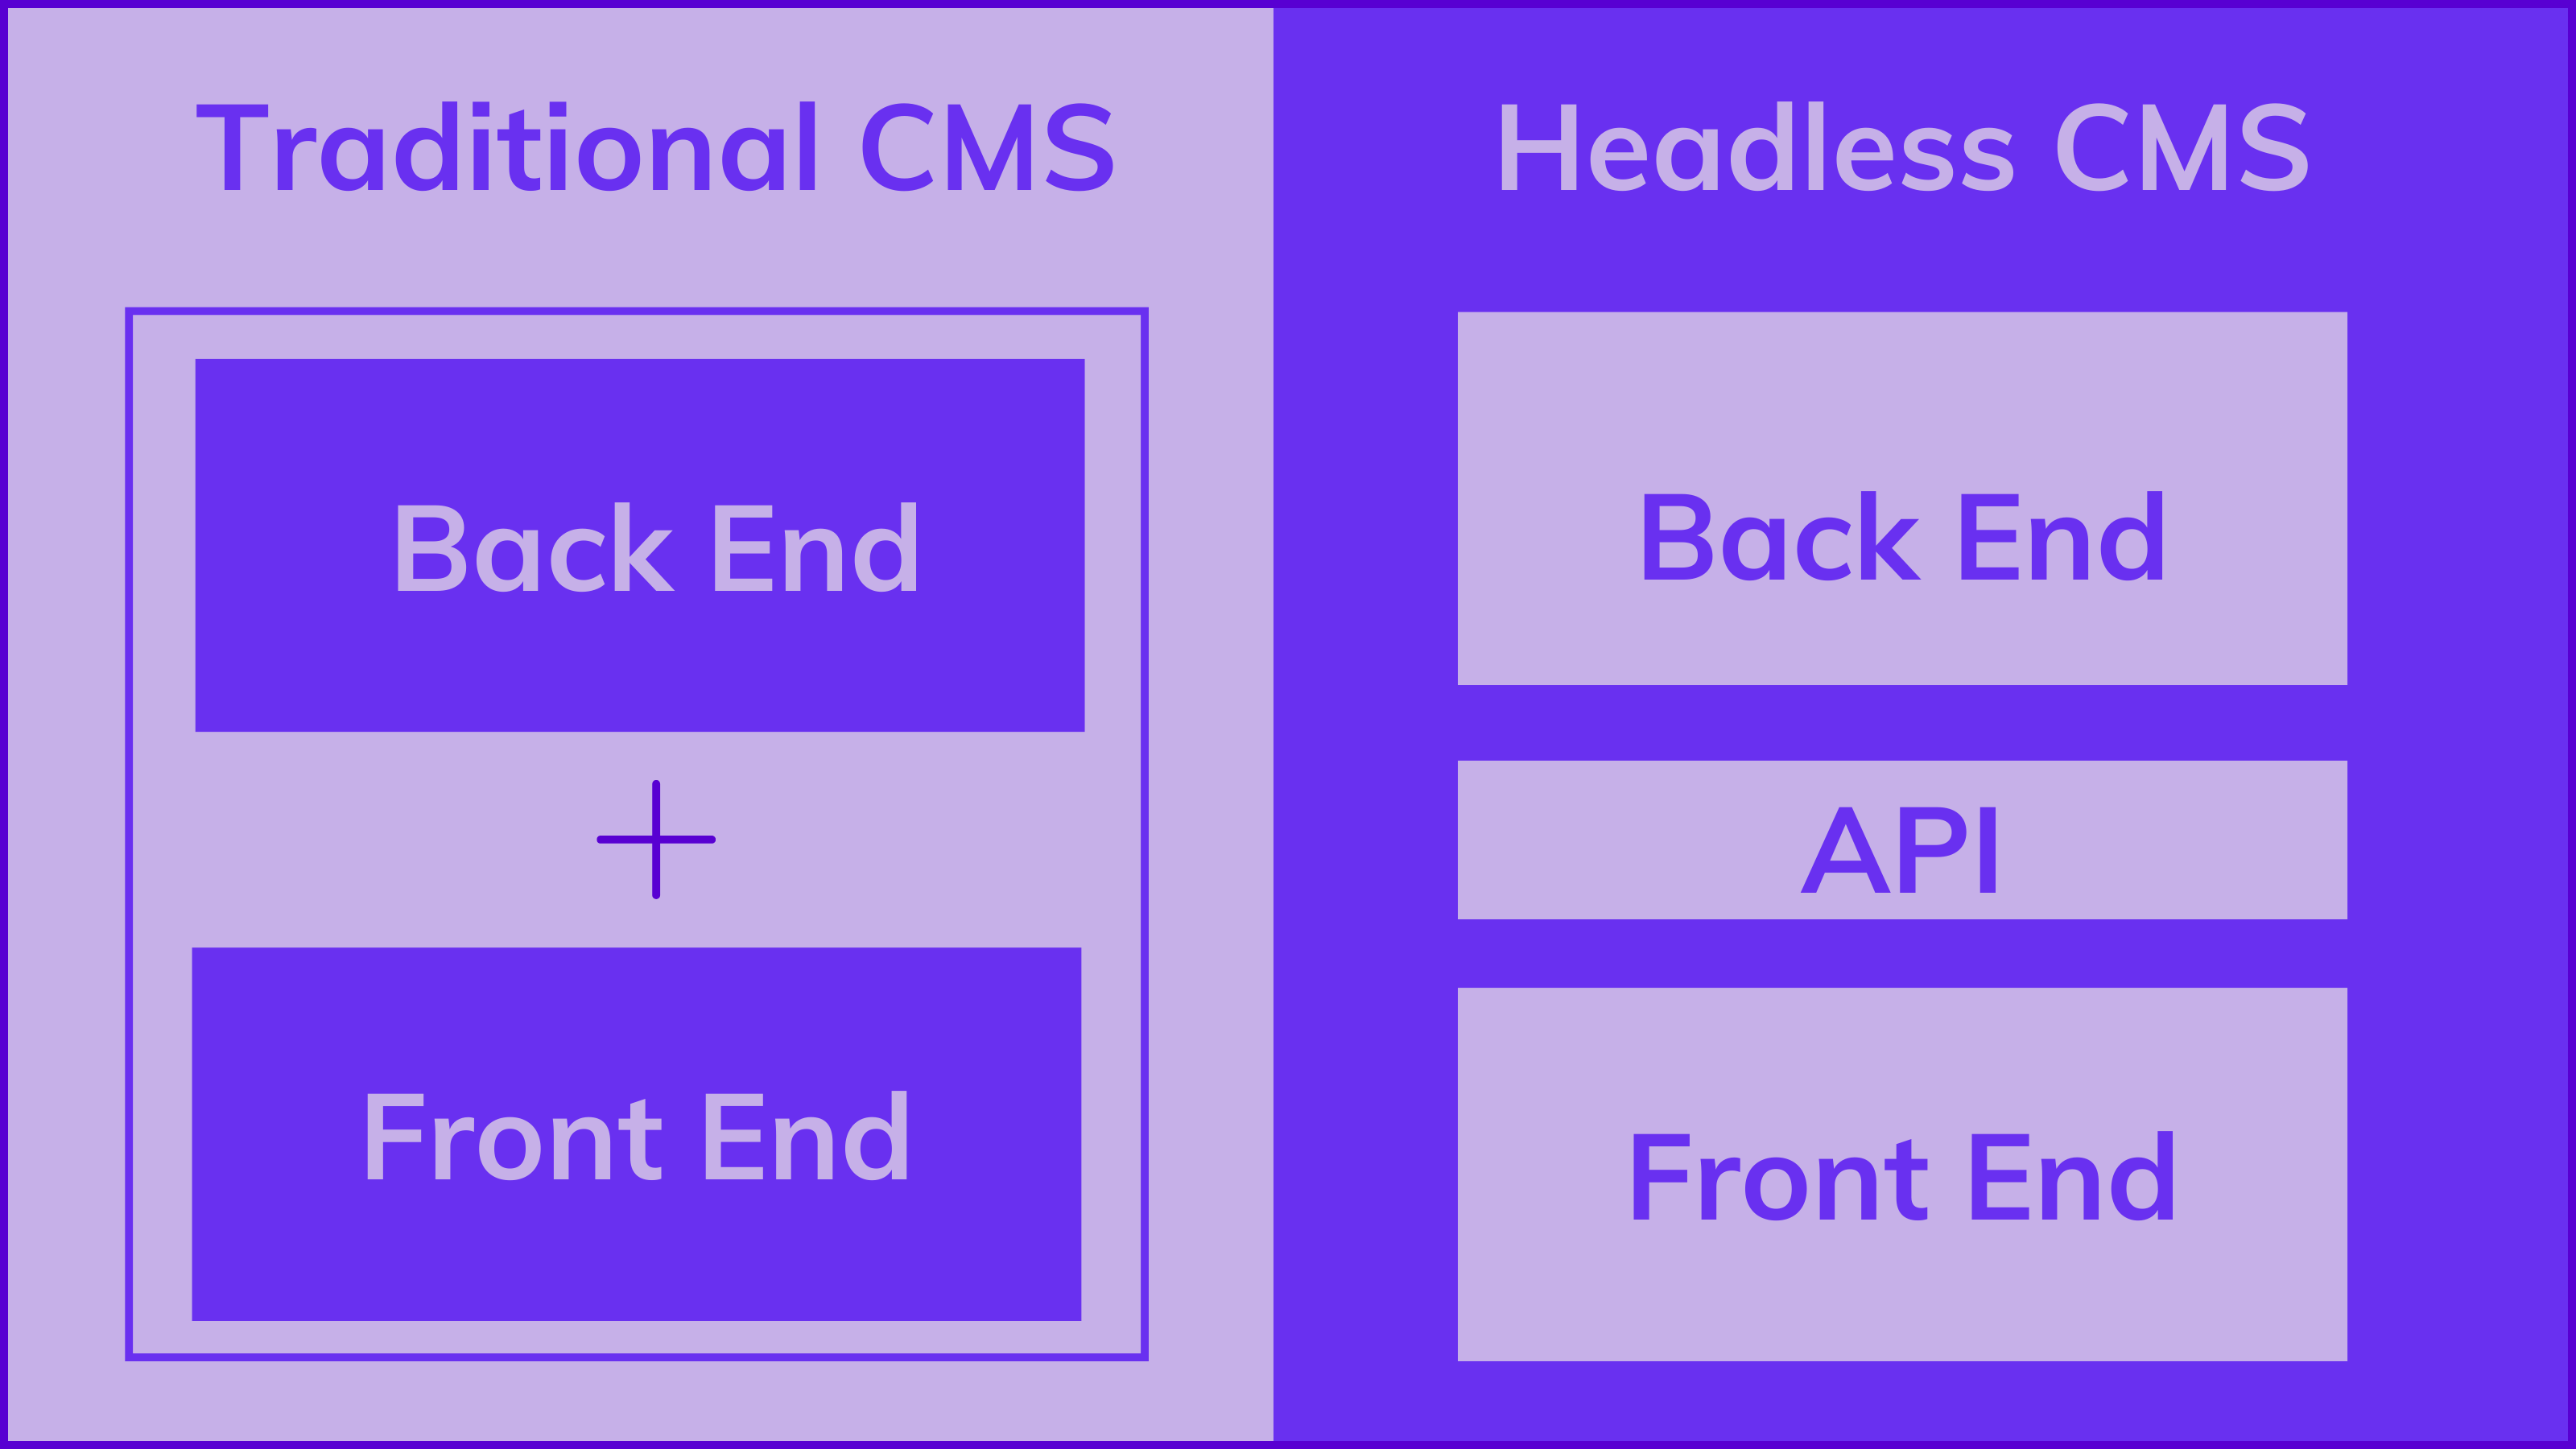 Comparing Headless CMS vs Traditional CMS